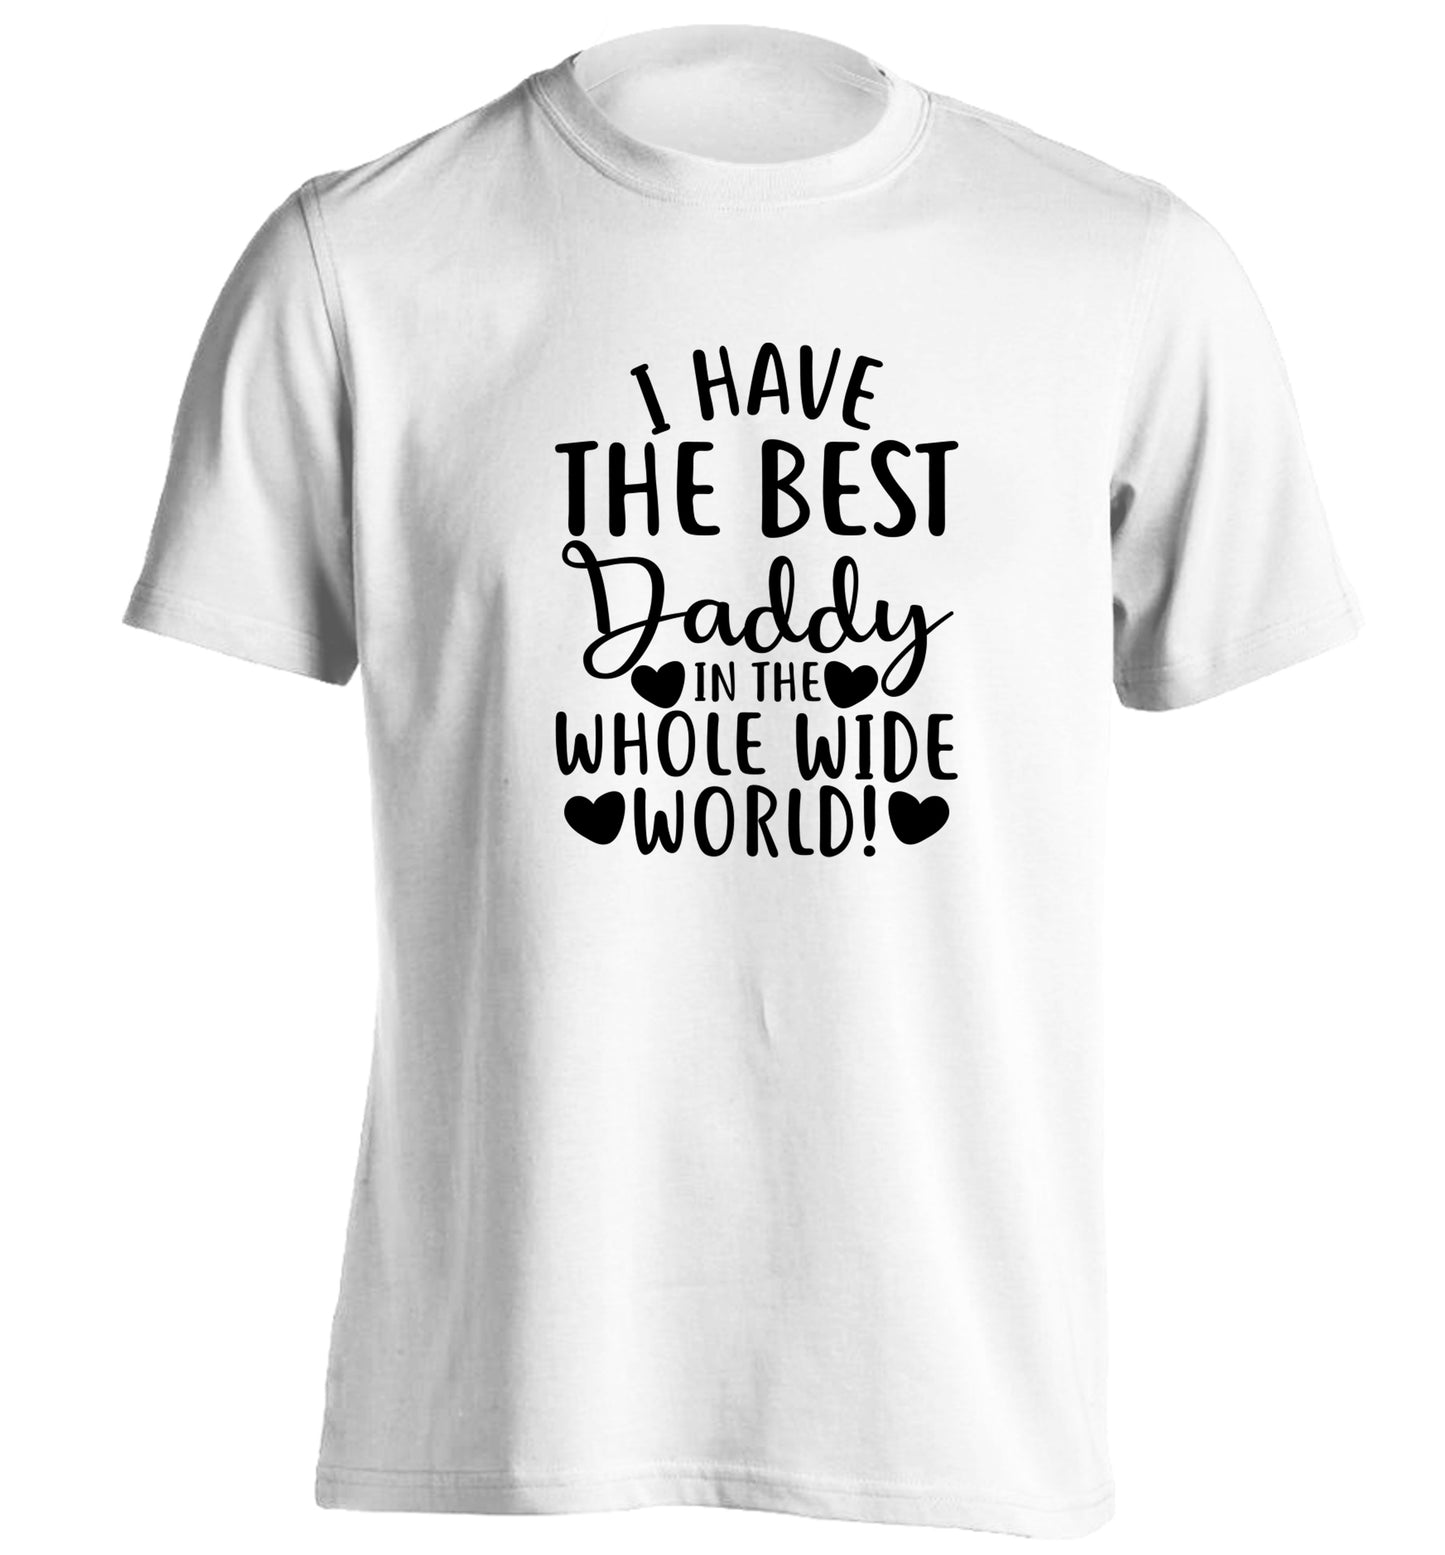 I have the best daddy in the whole wide world adults unisex white Tshirt 2XL